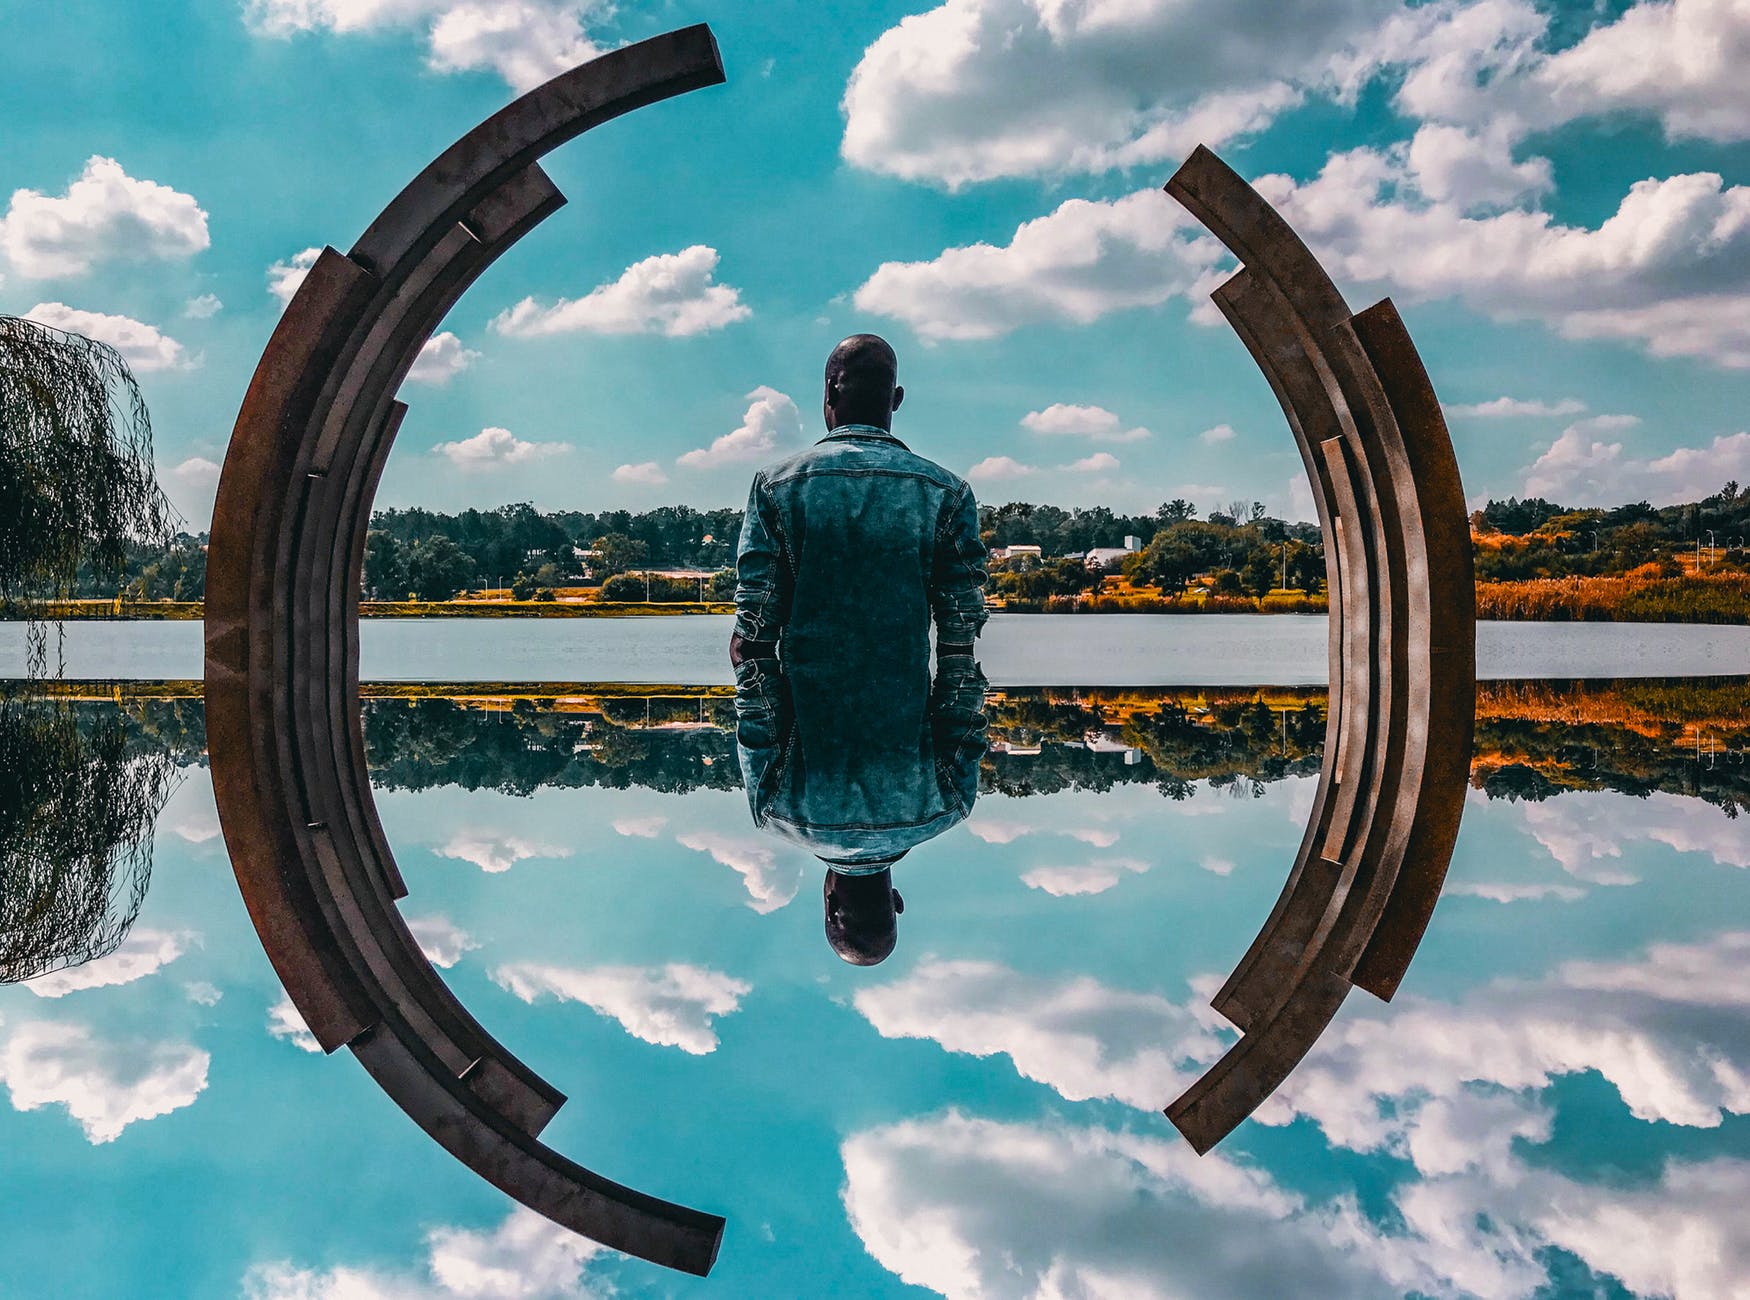 Reflection of a man gazing at clouds reflected in water